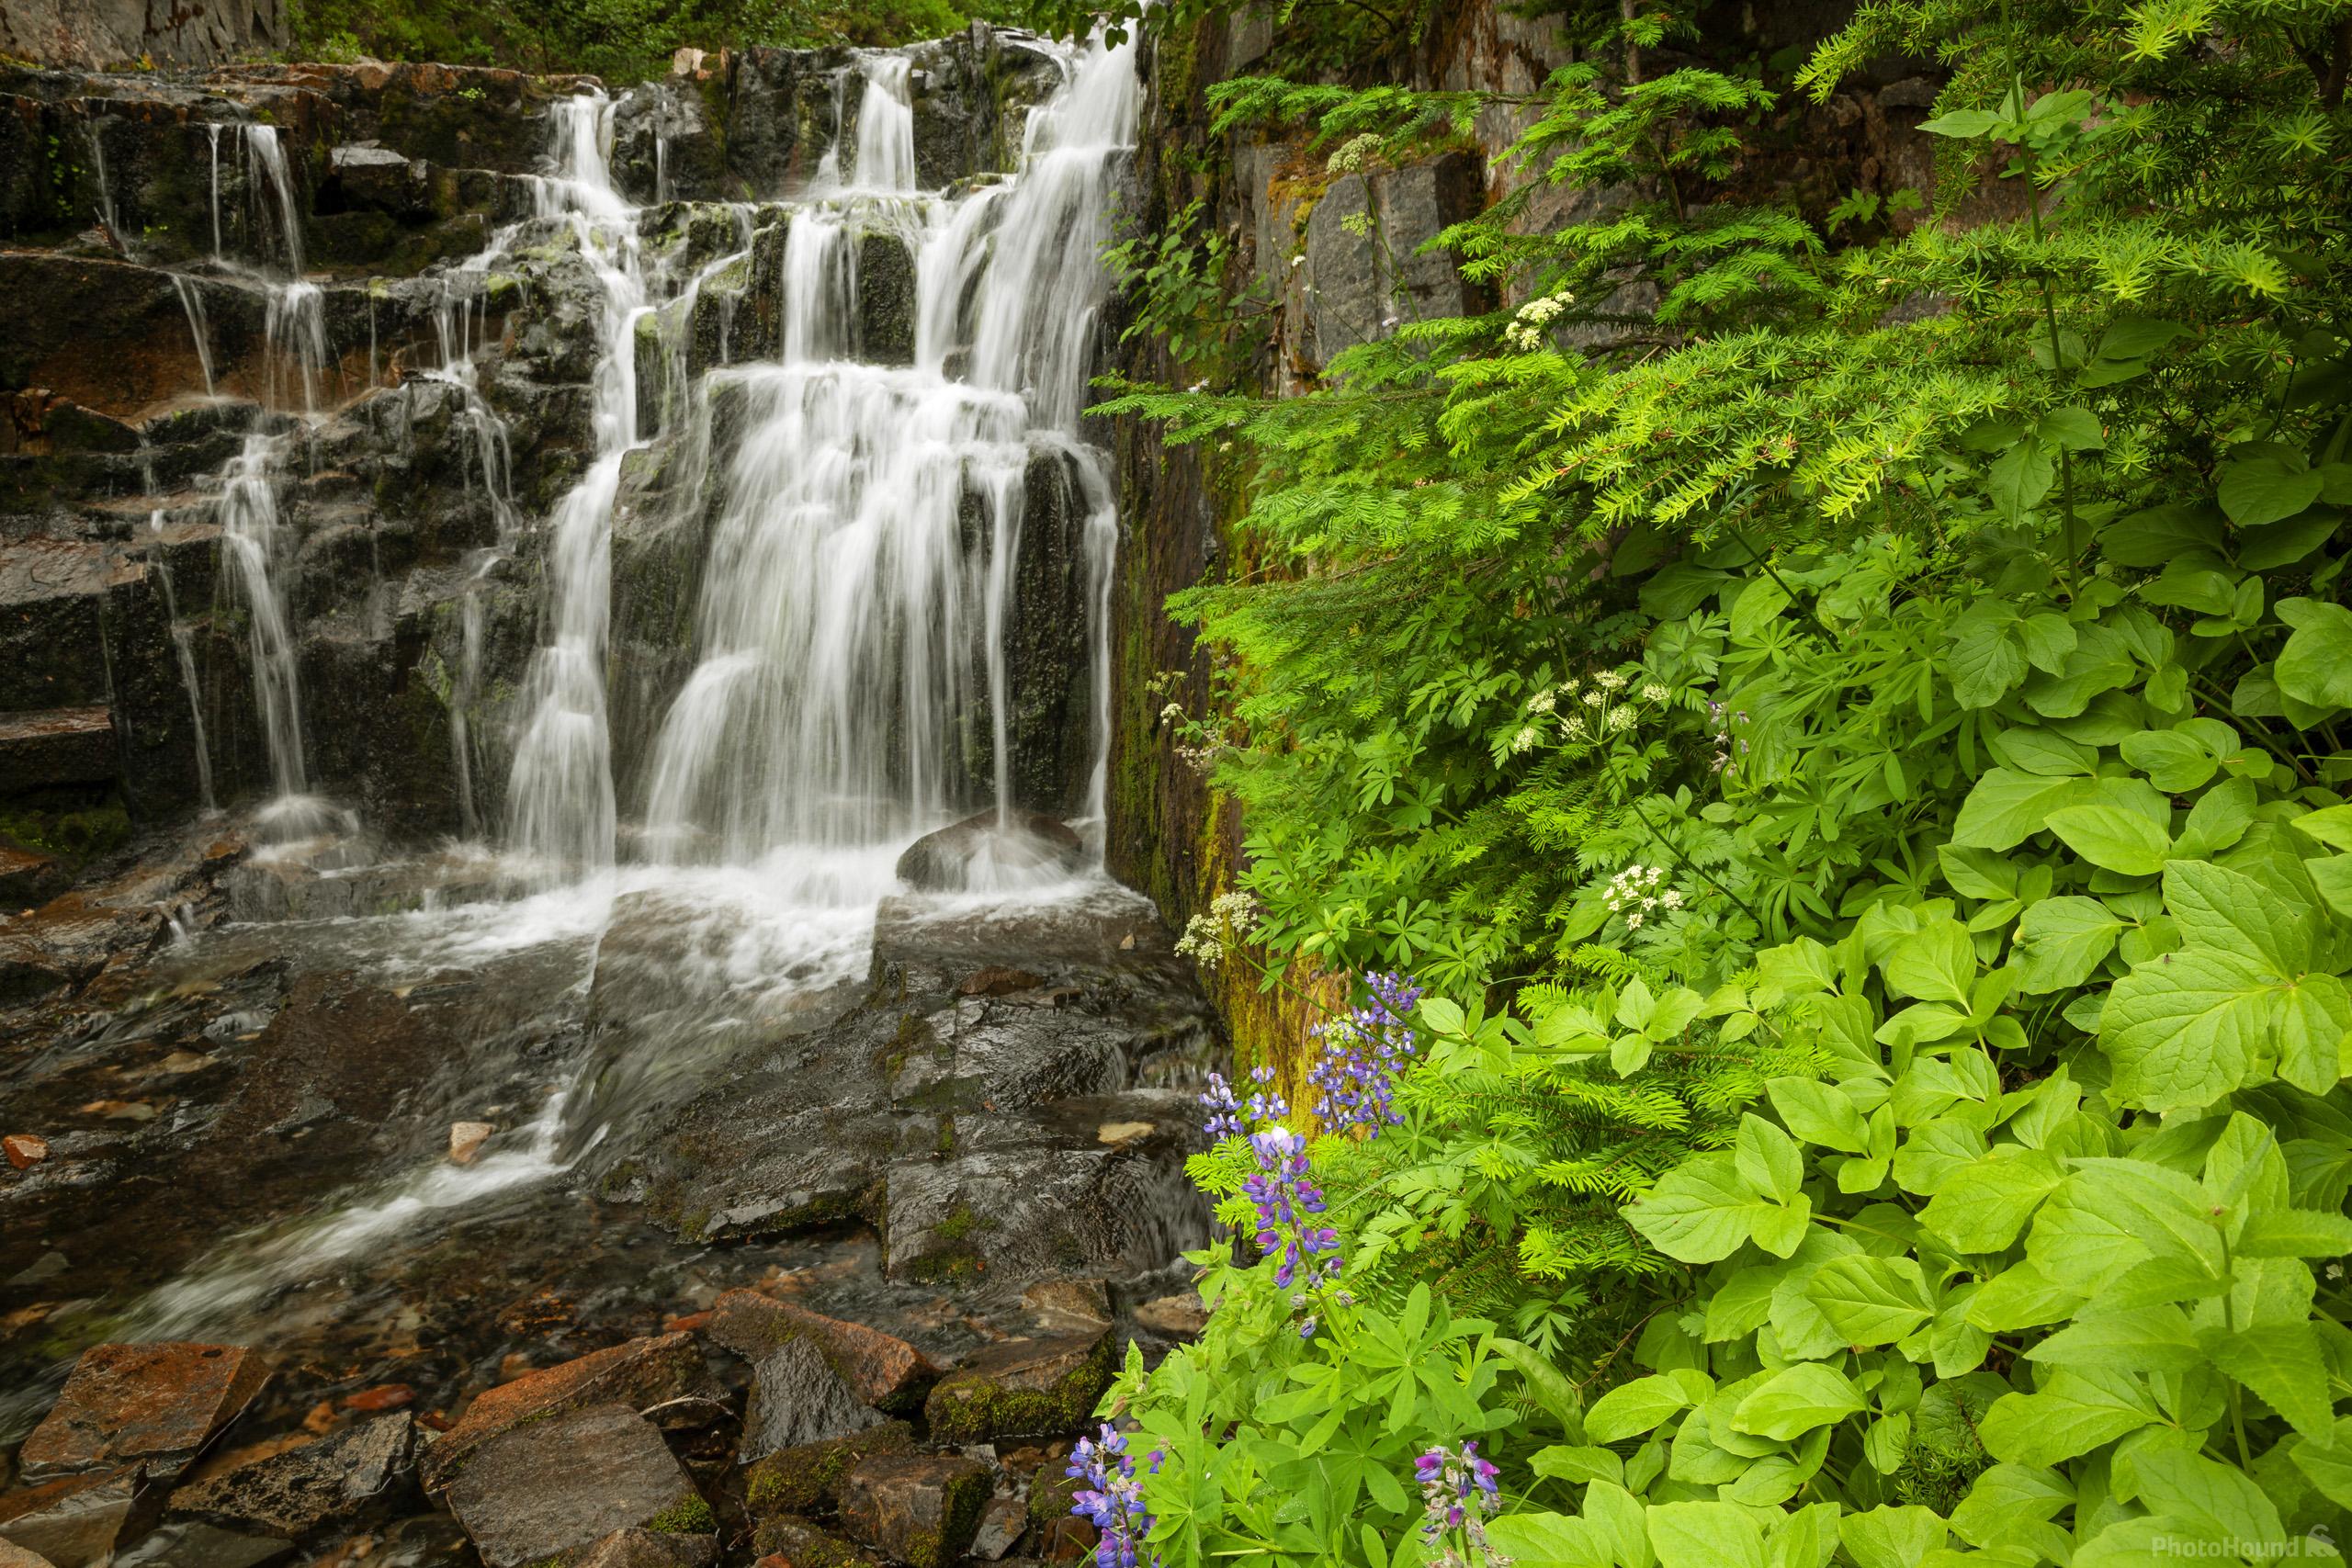 Image of Sunbeam Falls, Mount Rainier National Park by T. Kirkendall and V. Spring